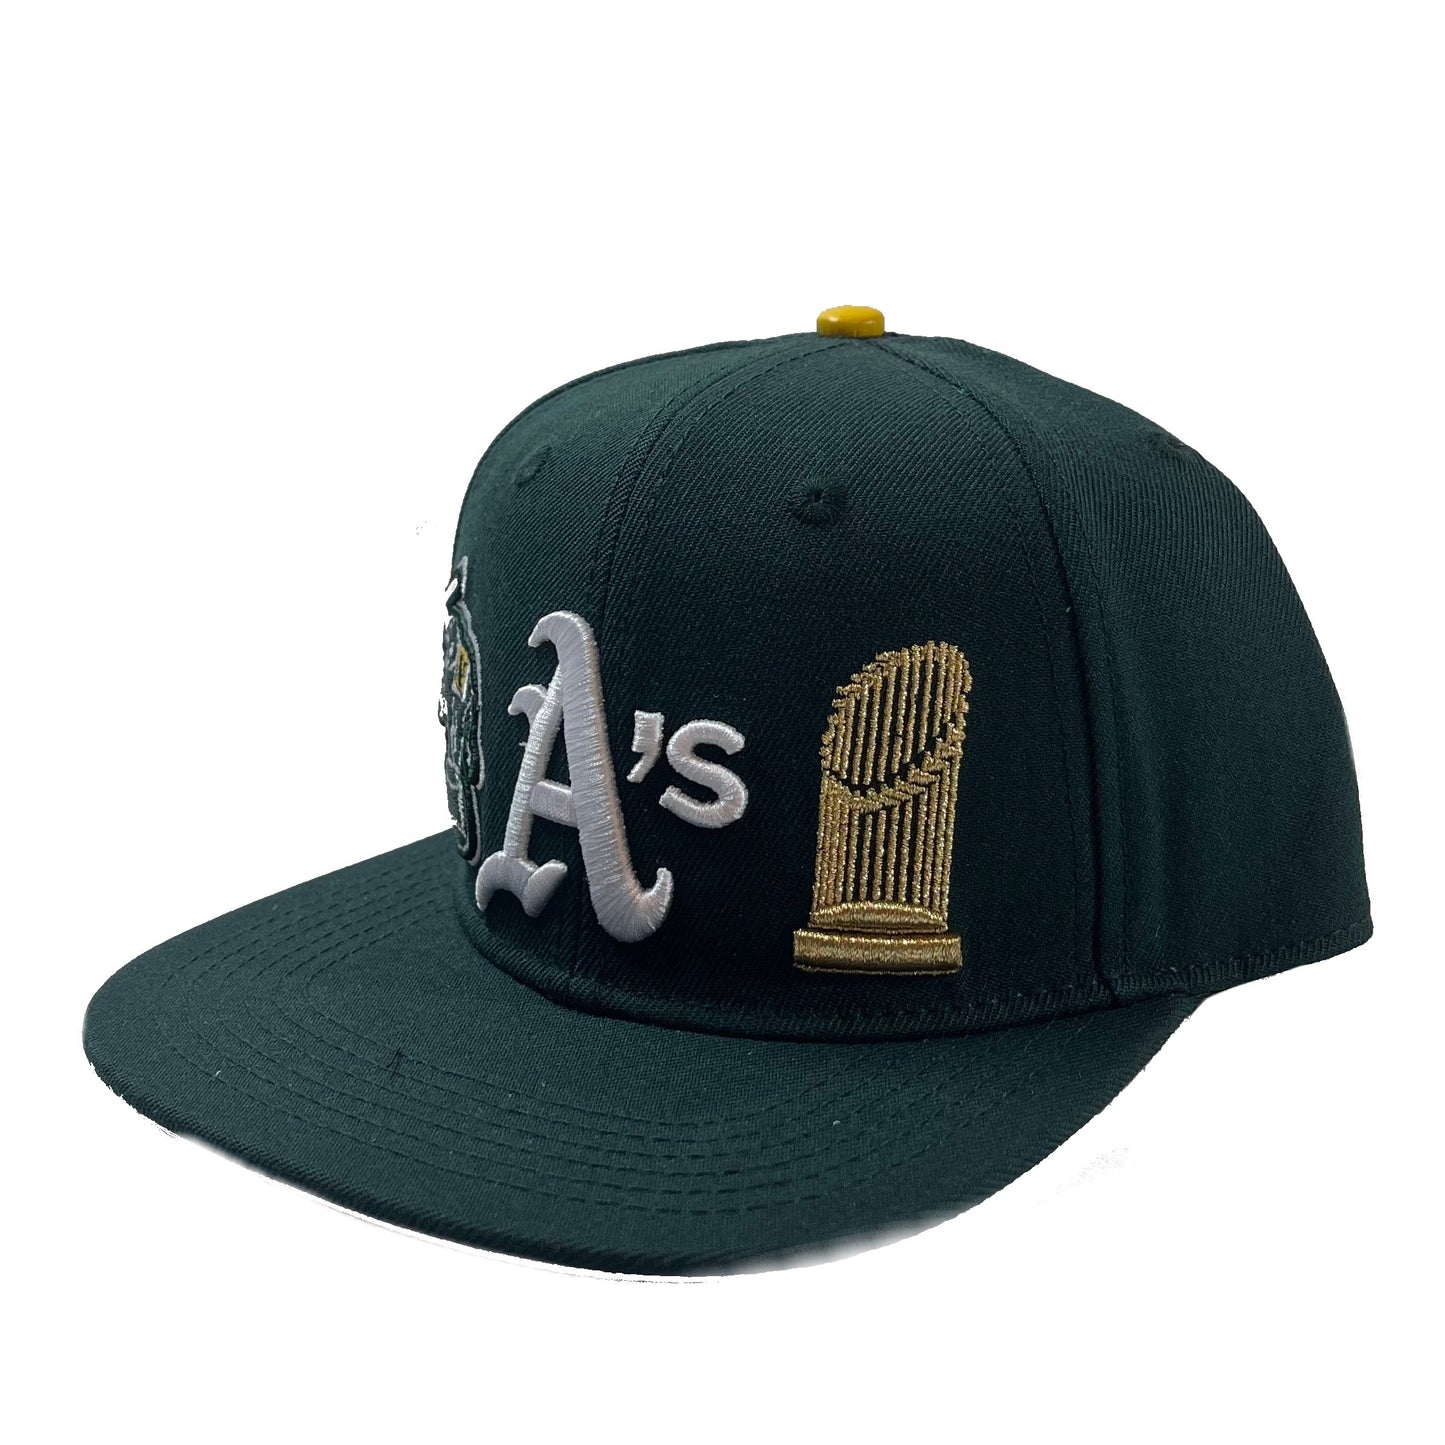 Oakland Athletic's World Series Patches (Green) Snapback